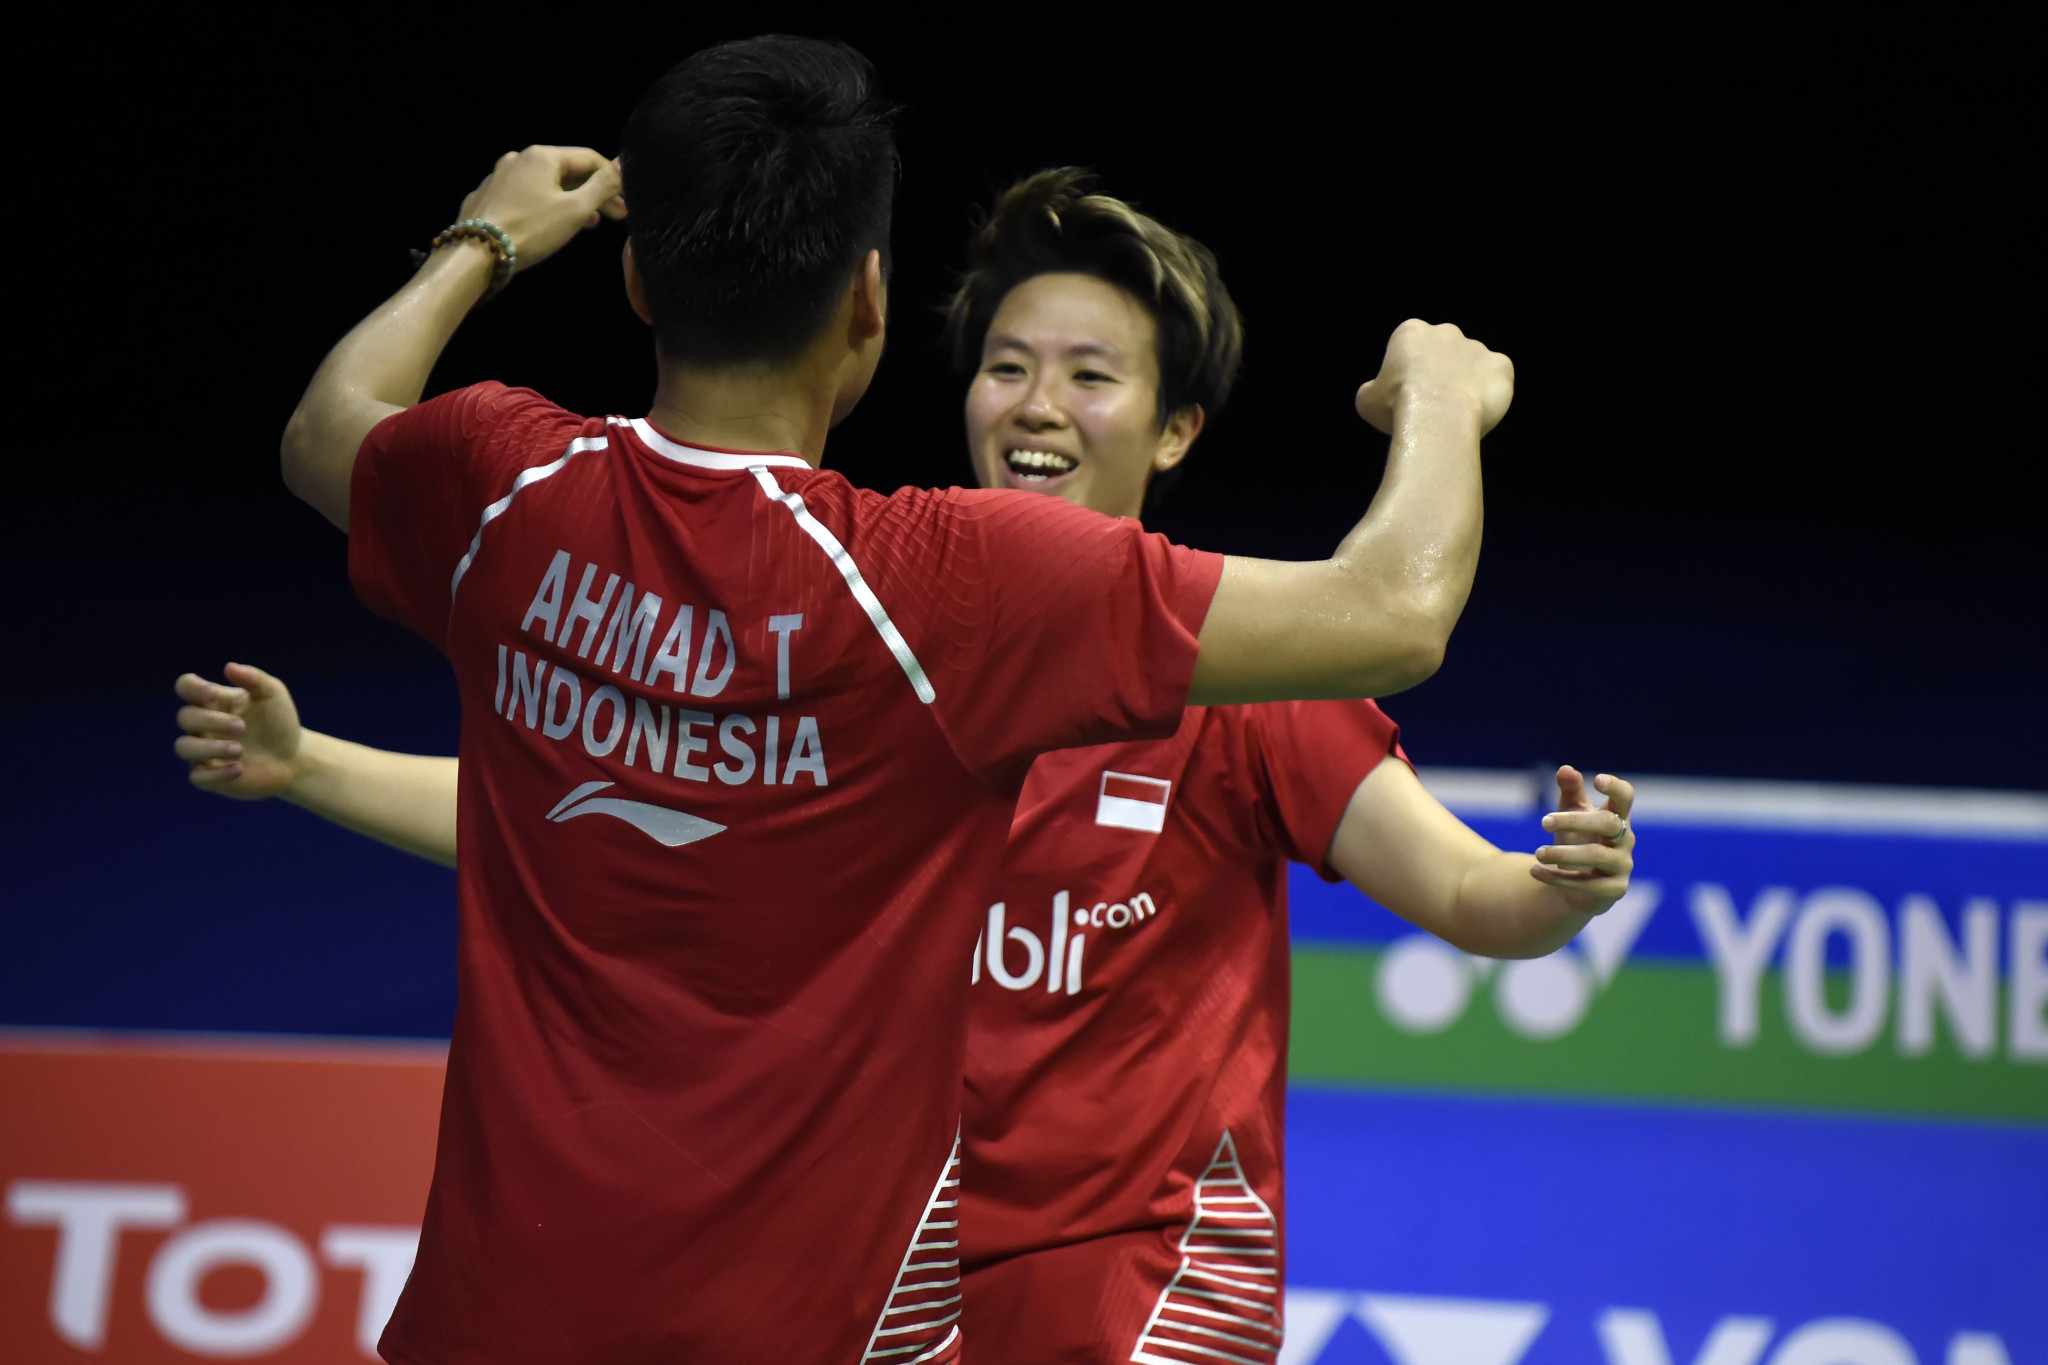 Olympic and world champions Tontowi Ahmad and Liliyana Natsir of Indonesia reached the second round ©Getty Images